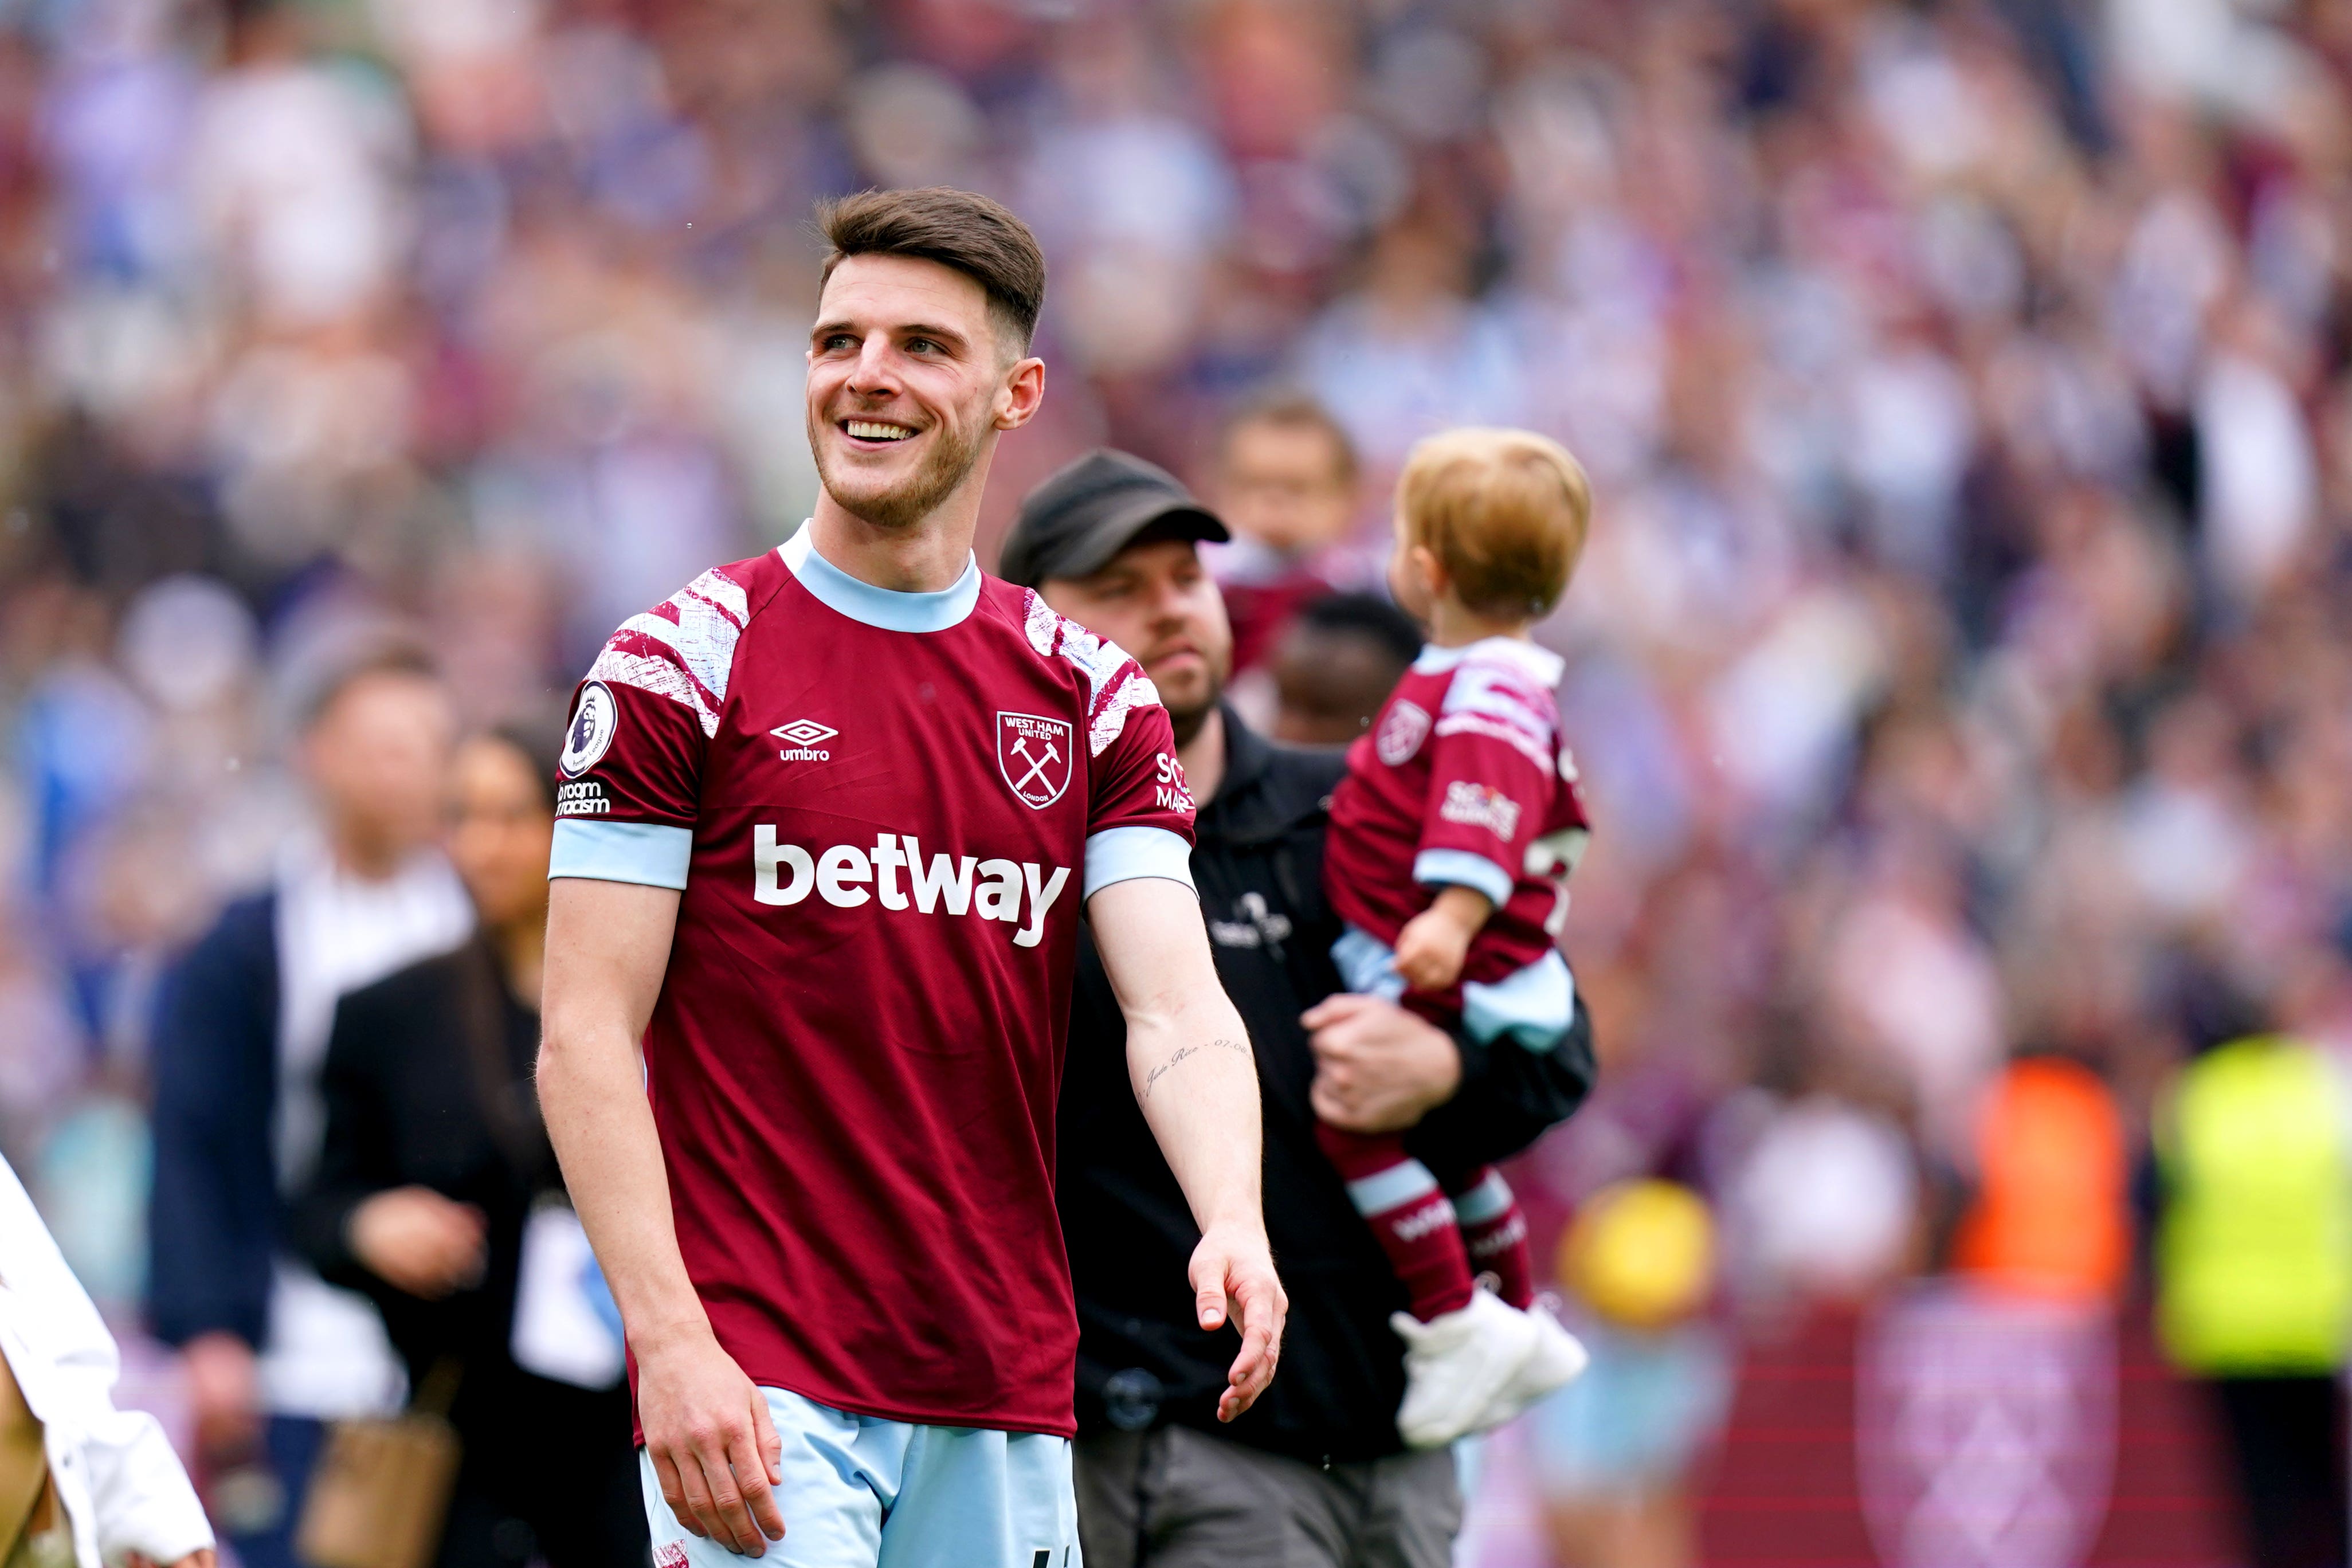 West Ham have received bids from Arsenal and Manchester City for their captain Declan Rice (John Walton, PA)